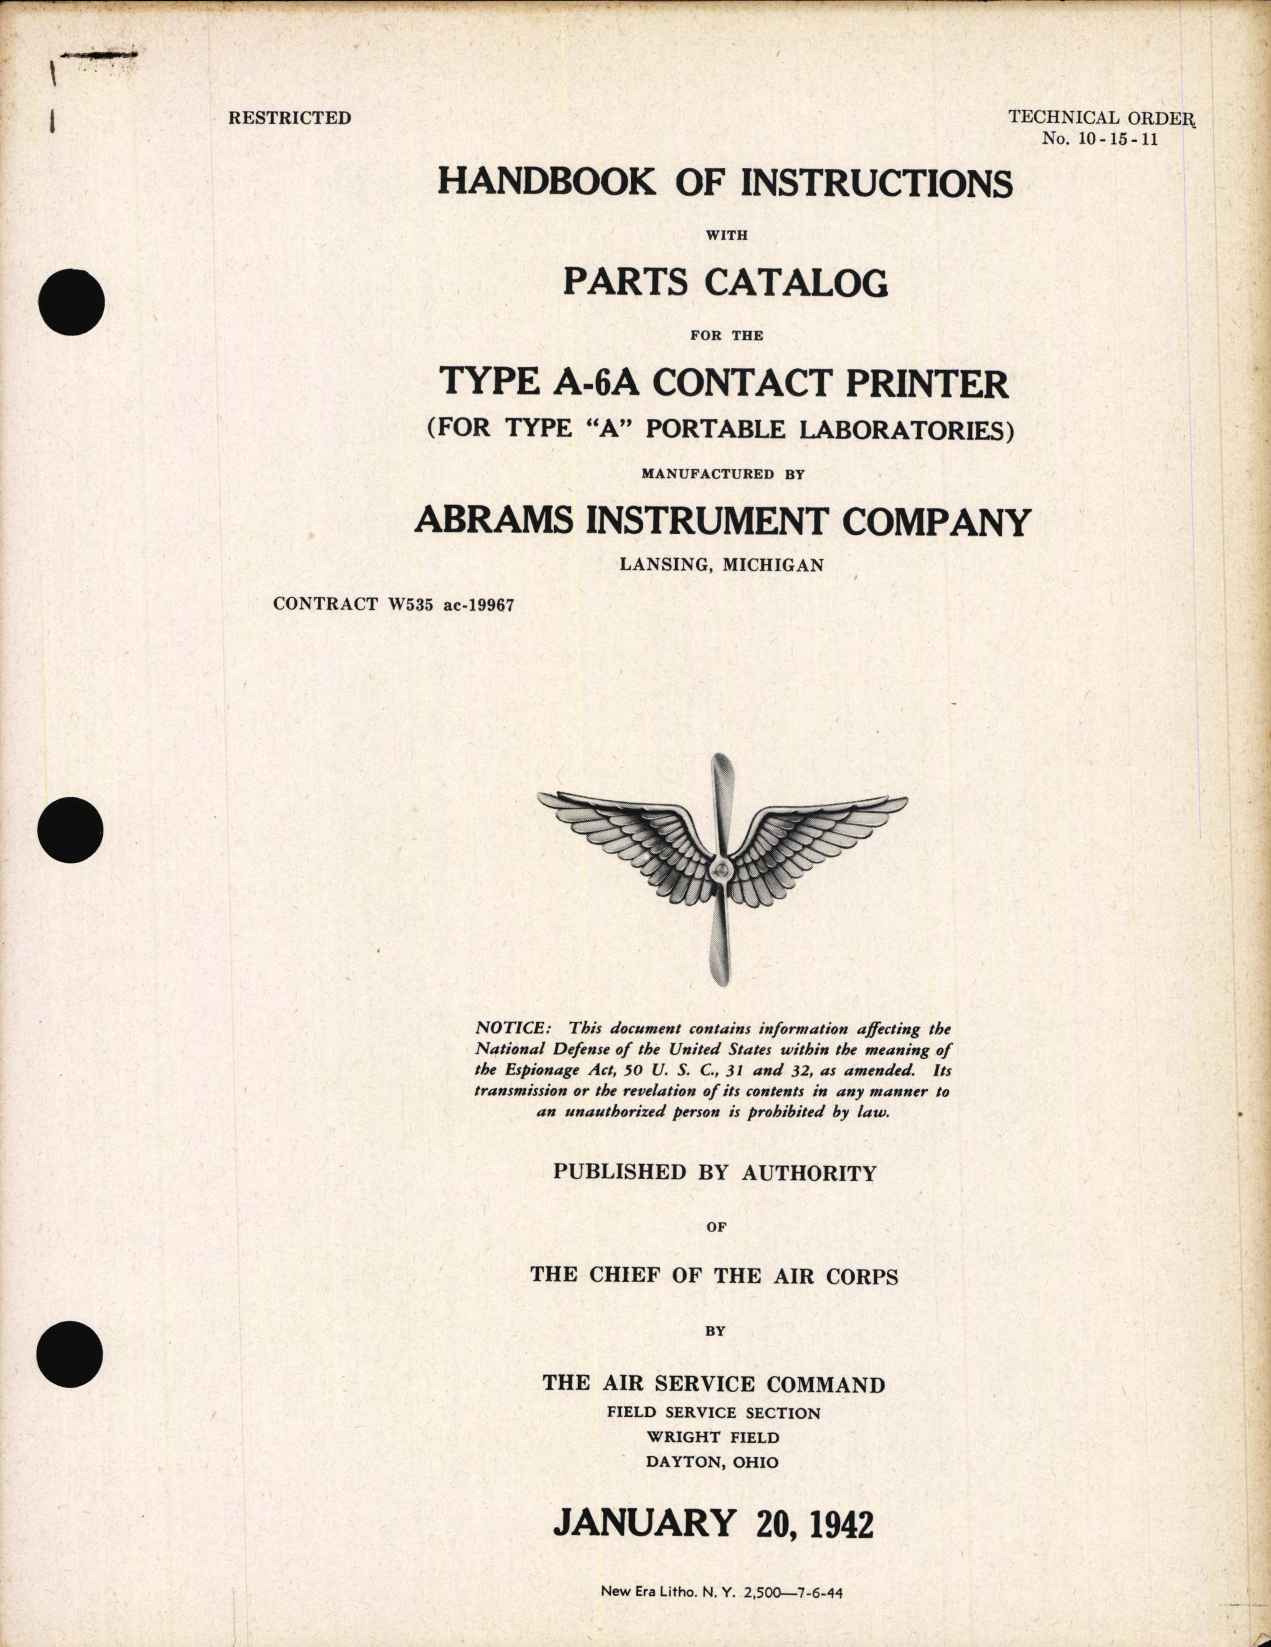 Sample page 1 from AirCorps Library document: Handbook of Instructions with Parts Catalog for Type A-6A Contact Printer for Type A Portable Laboratories